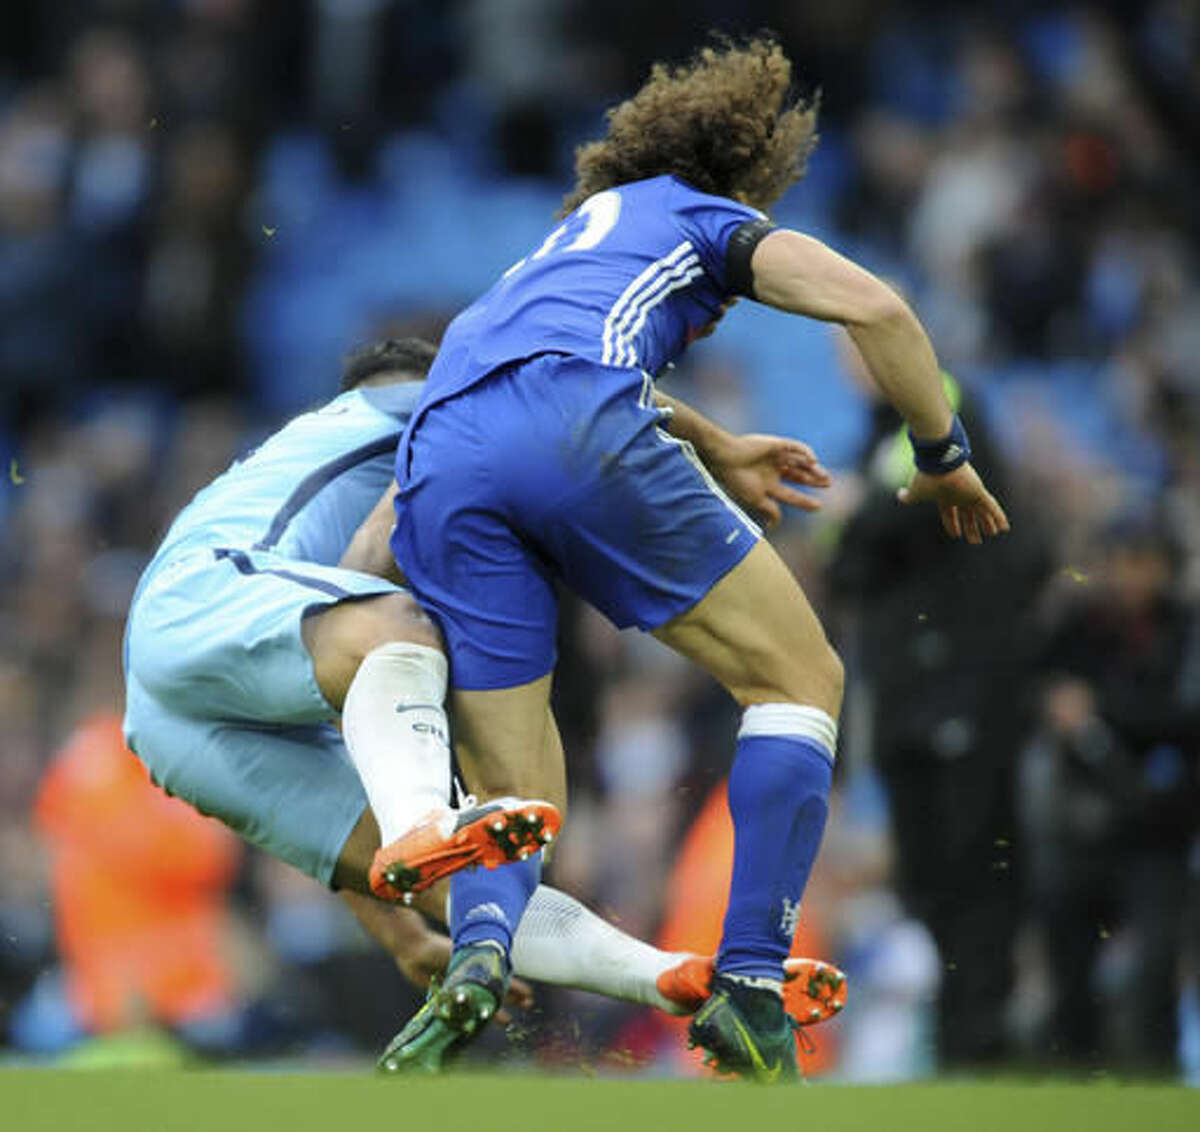 Manchester City's Sergio Aguero, left, is red carded for this tackle on Chelsea's David Luiz during the the English Premier League soccer match between Manchester City and Chelsea at the Etihad Stadium in Manchester, England, Saturday, Dec. 3, 2016. (AP Photo/Rui Vieira)